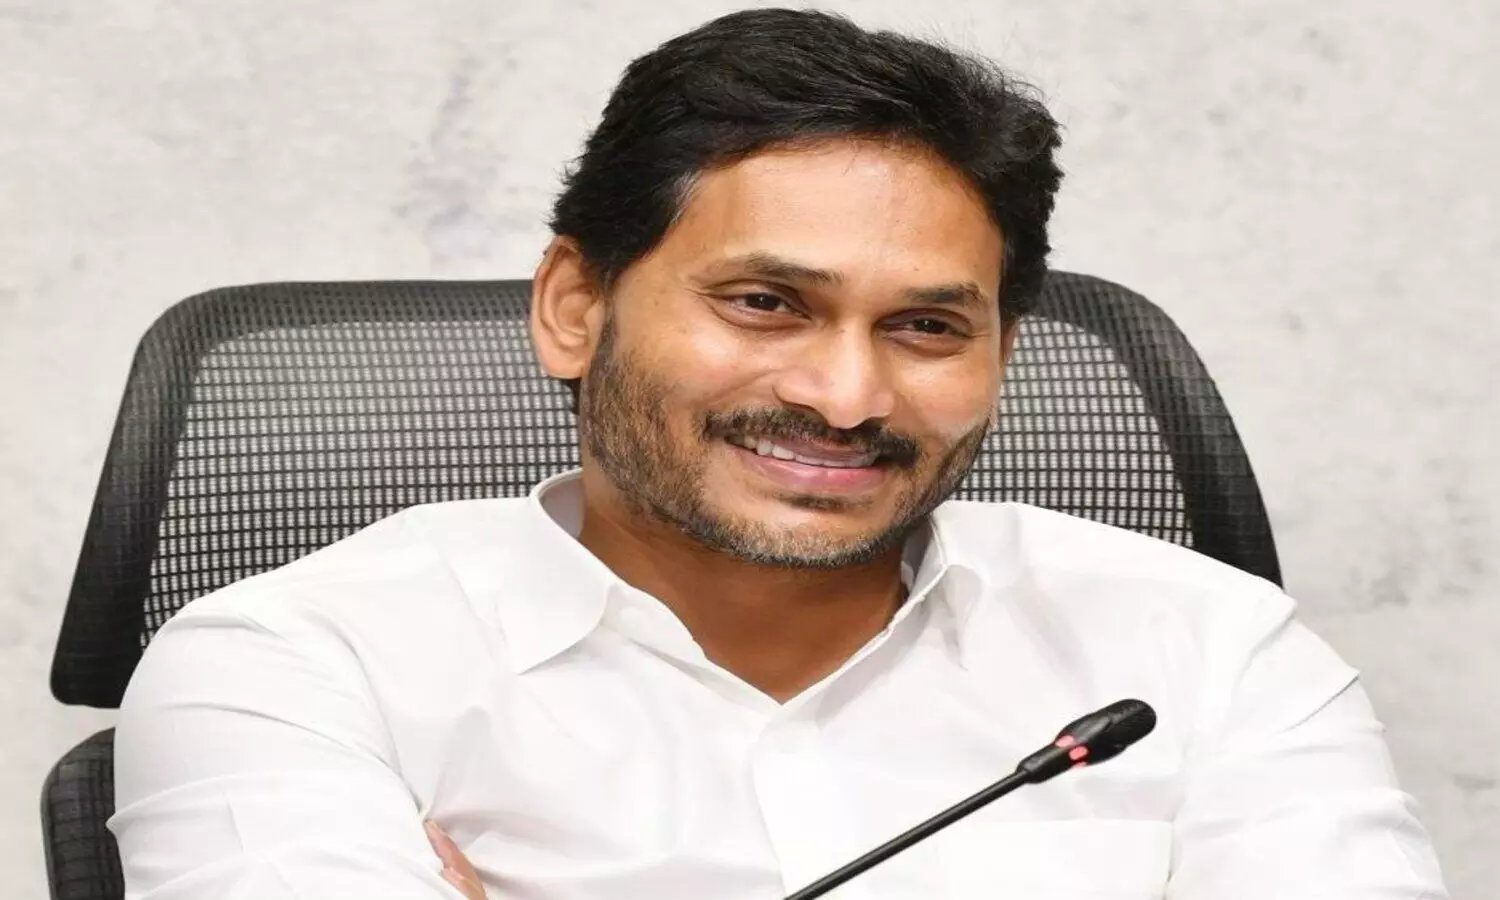 YS Jagan Mohan Reddy reveals assets totaling Rs. 680 crore, facing 26 criminal cases